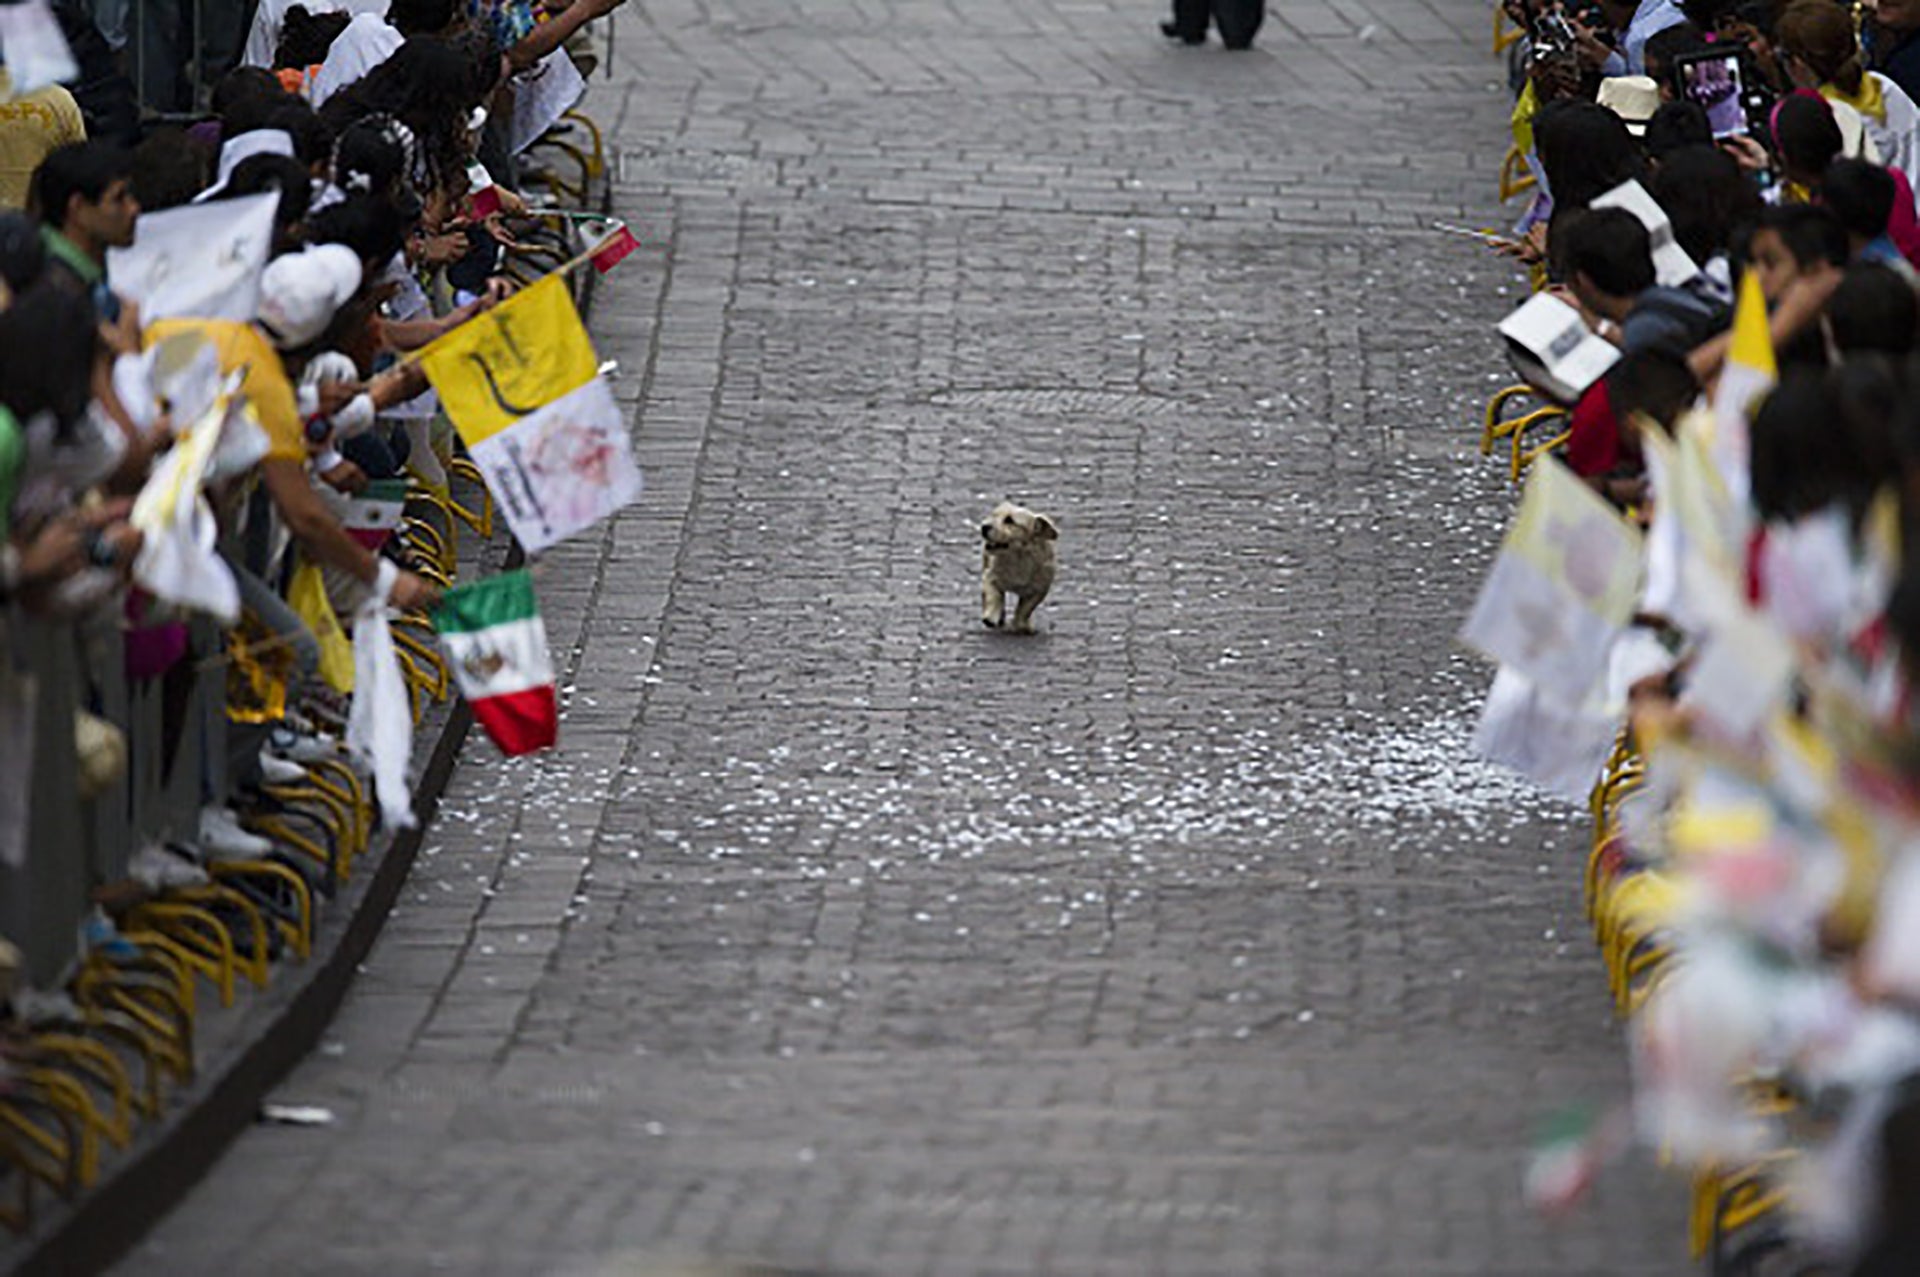 a little white dog trots happily along a cobblestone path. people are cheering and waving flags on either side of them. confetti is covering parts of the path. the dog is holding their head high, as if to greet all the people